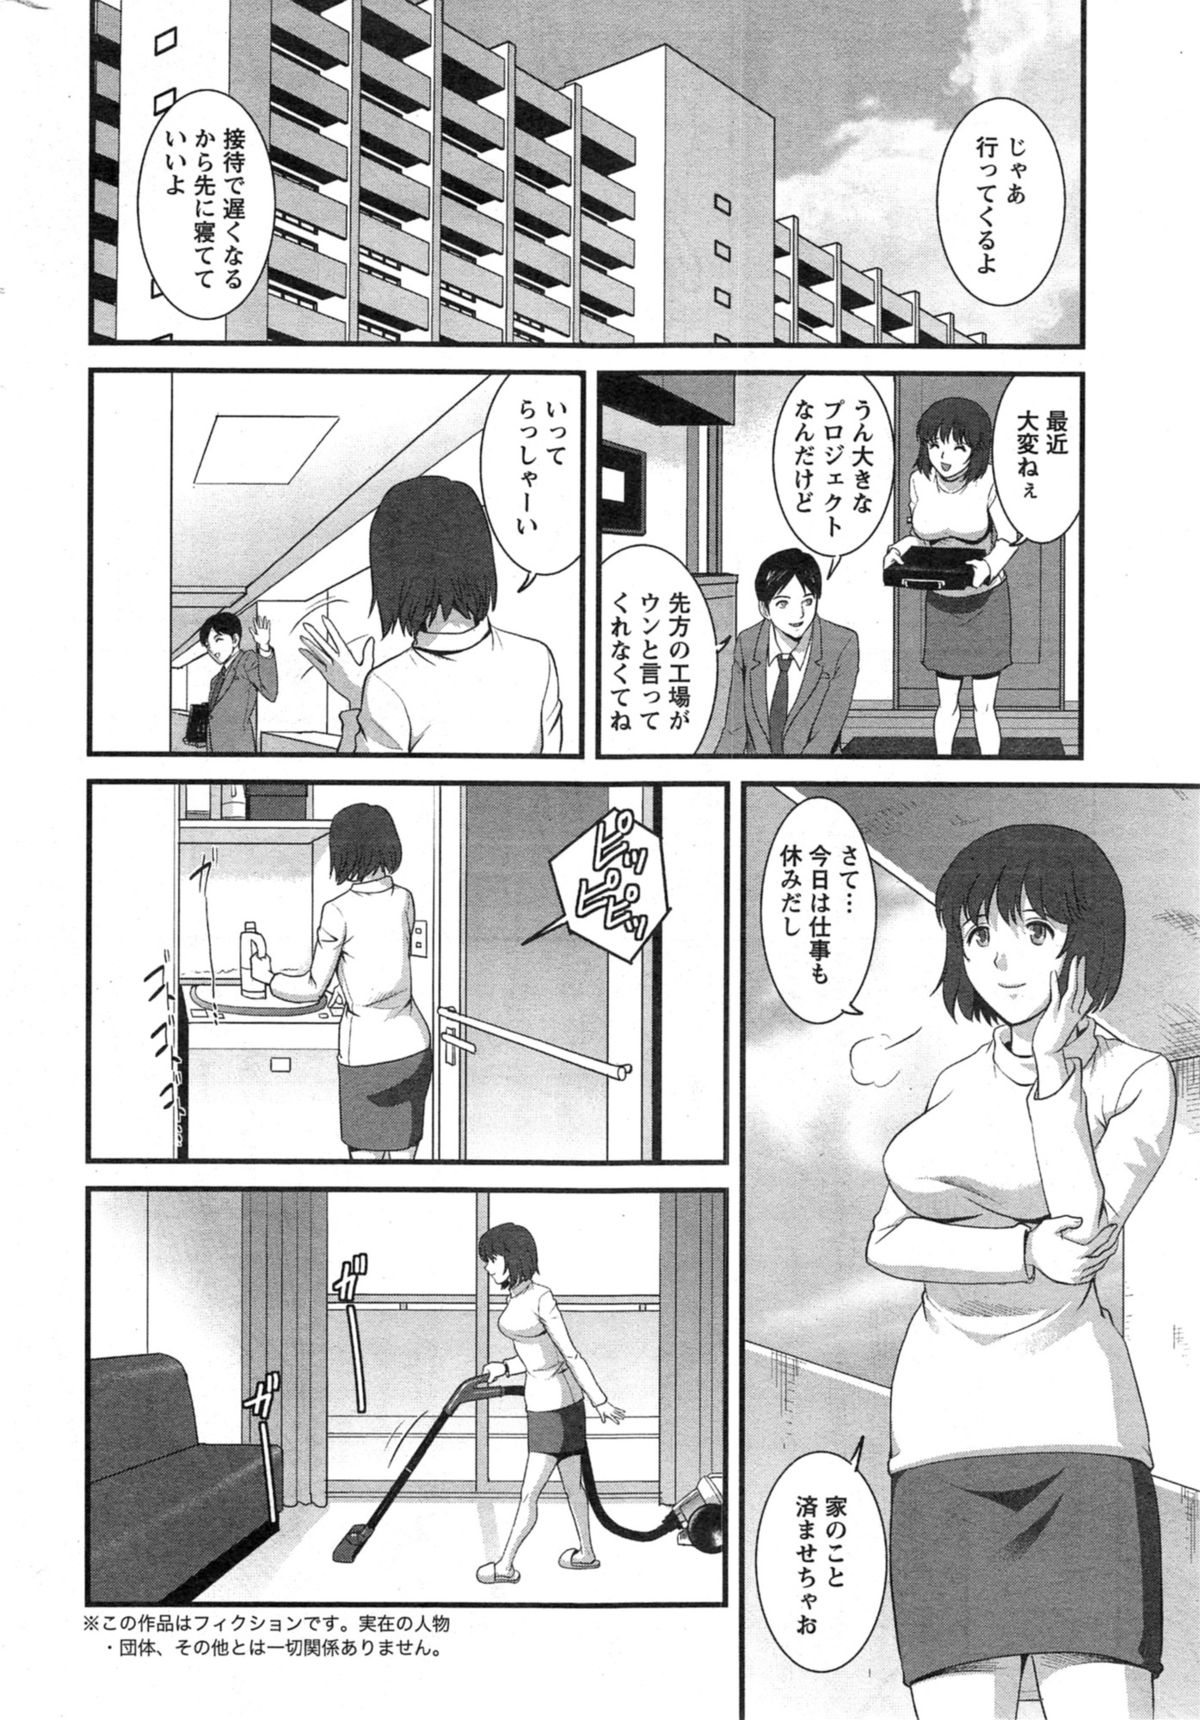 Action Pizazz 2014-02 page 28 full